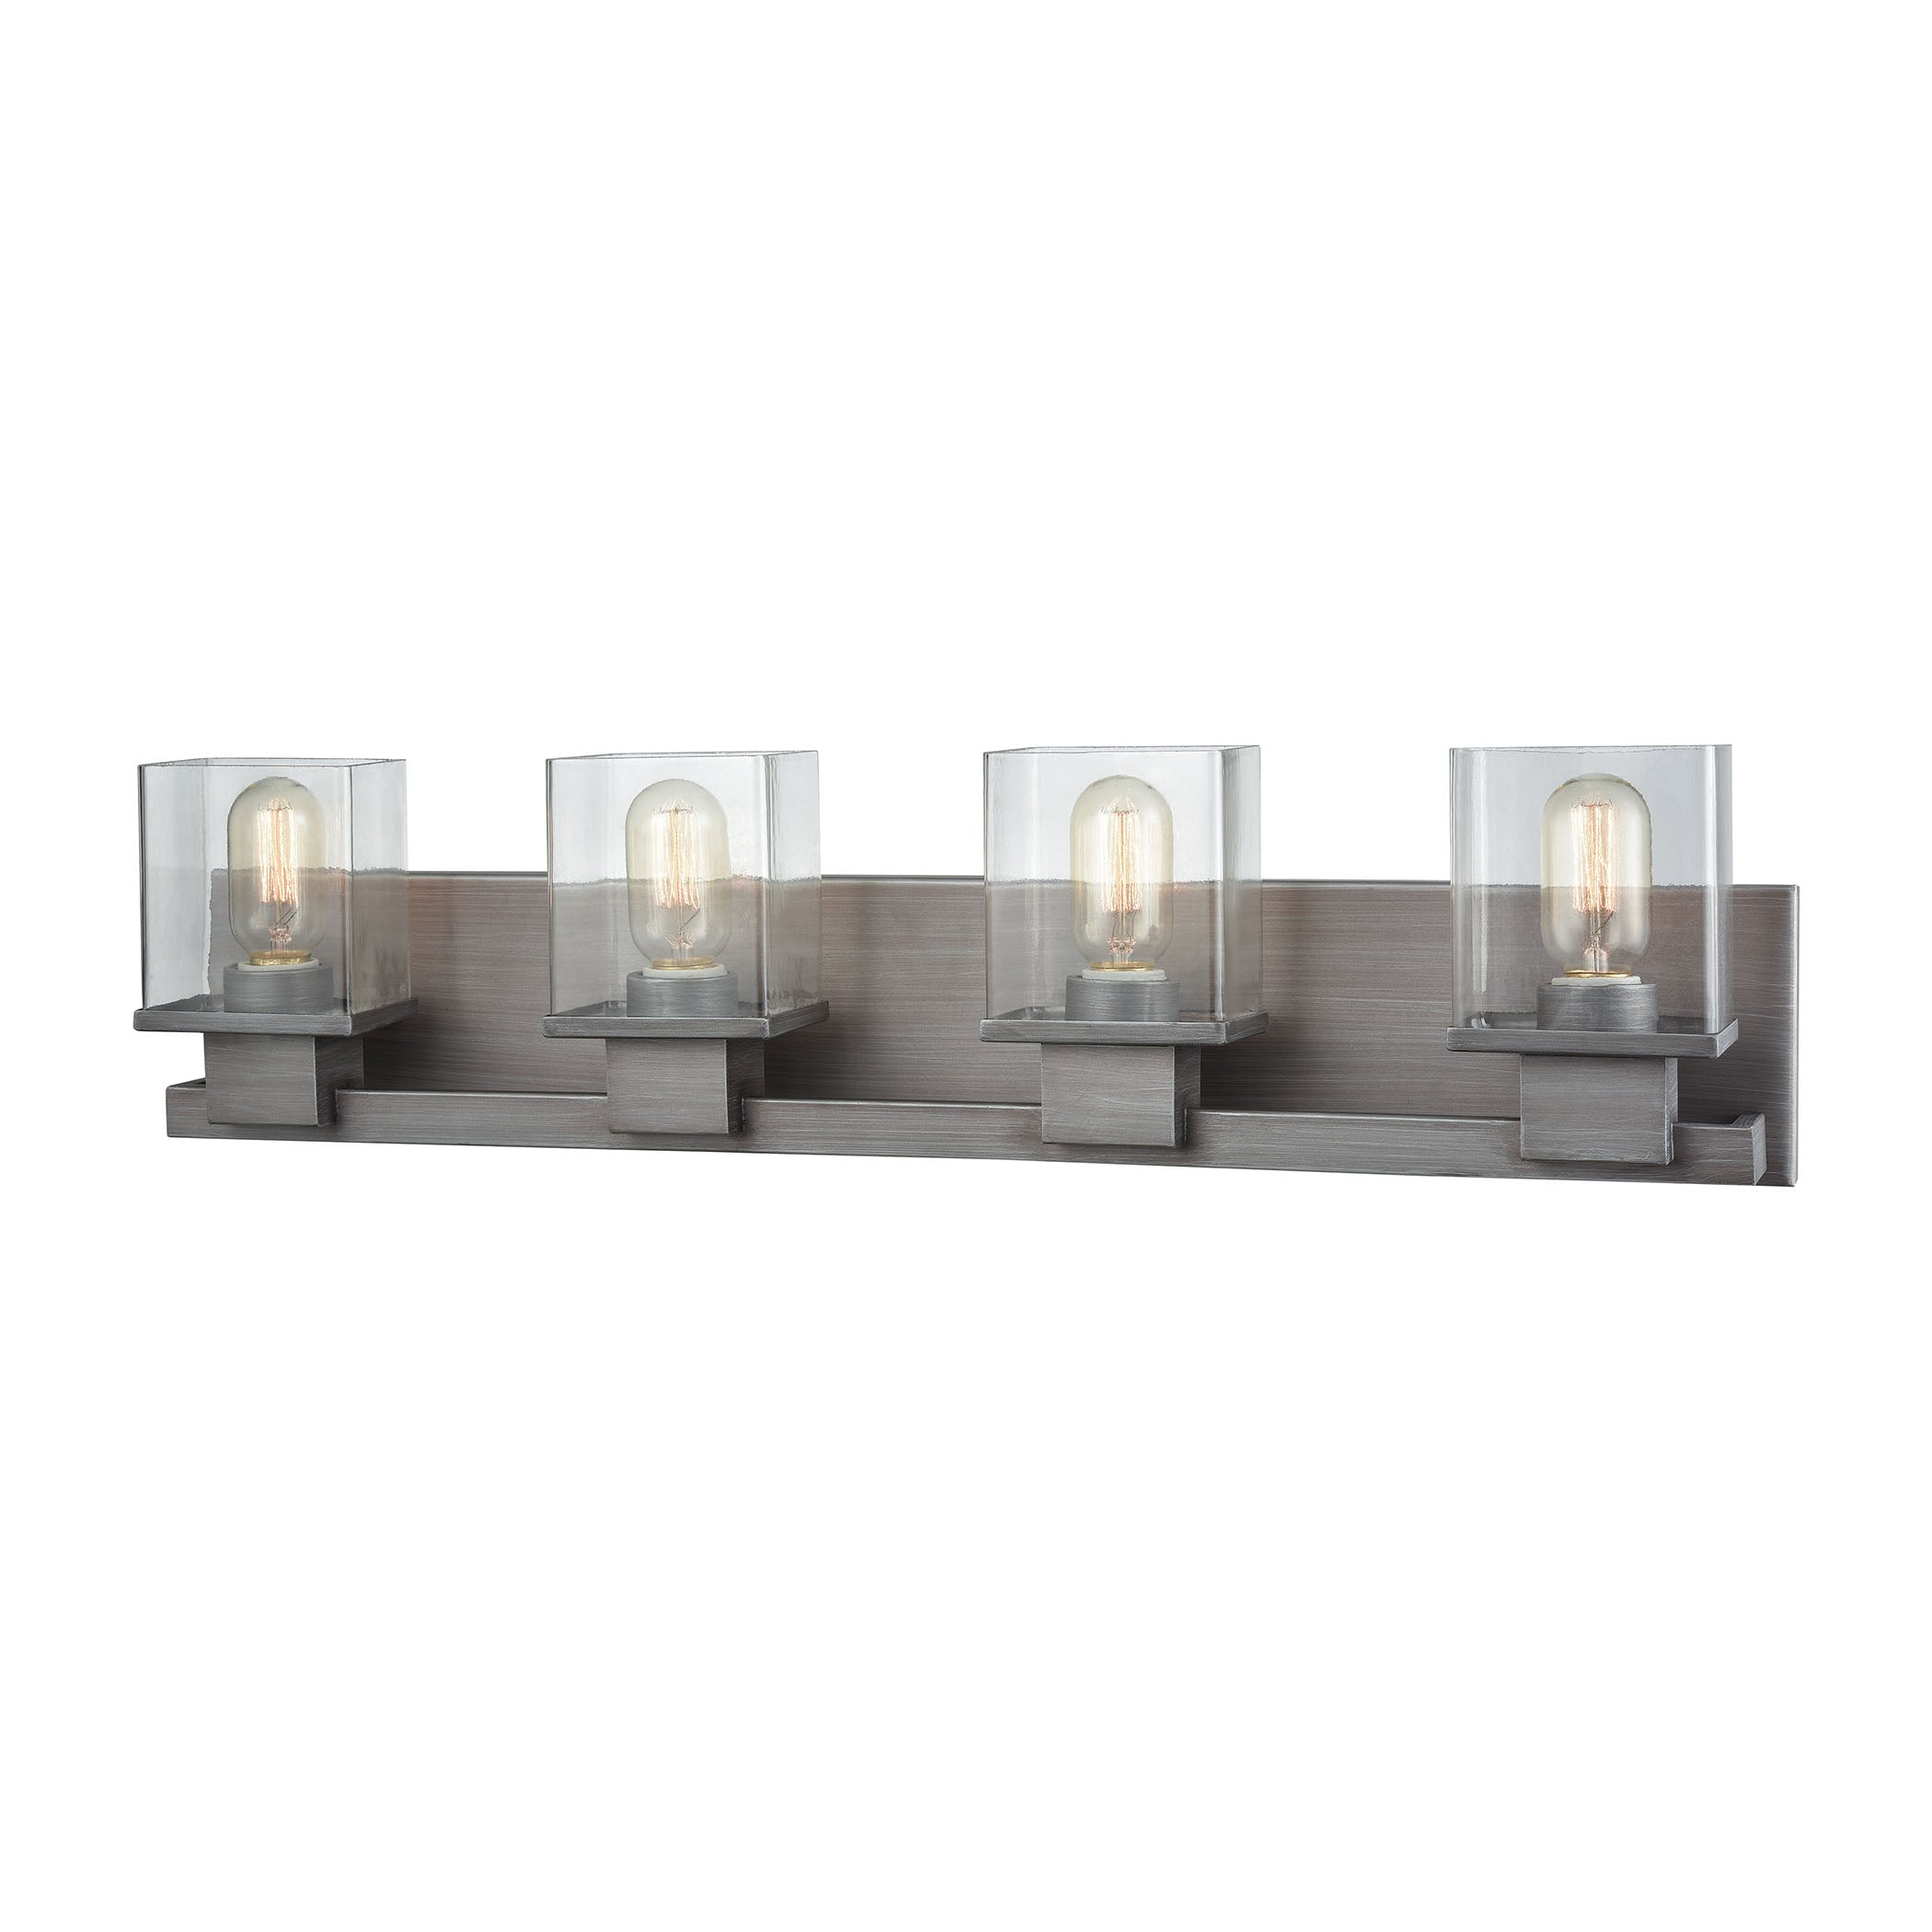 ELK Lighting 11943/4 Hotelier 4-Light Vanity Sconce in Weathered Zinc with Clear Glass